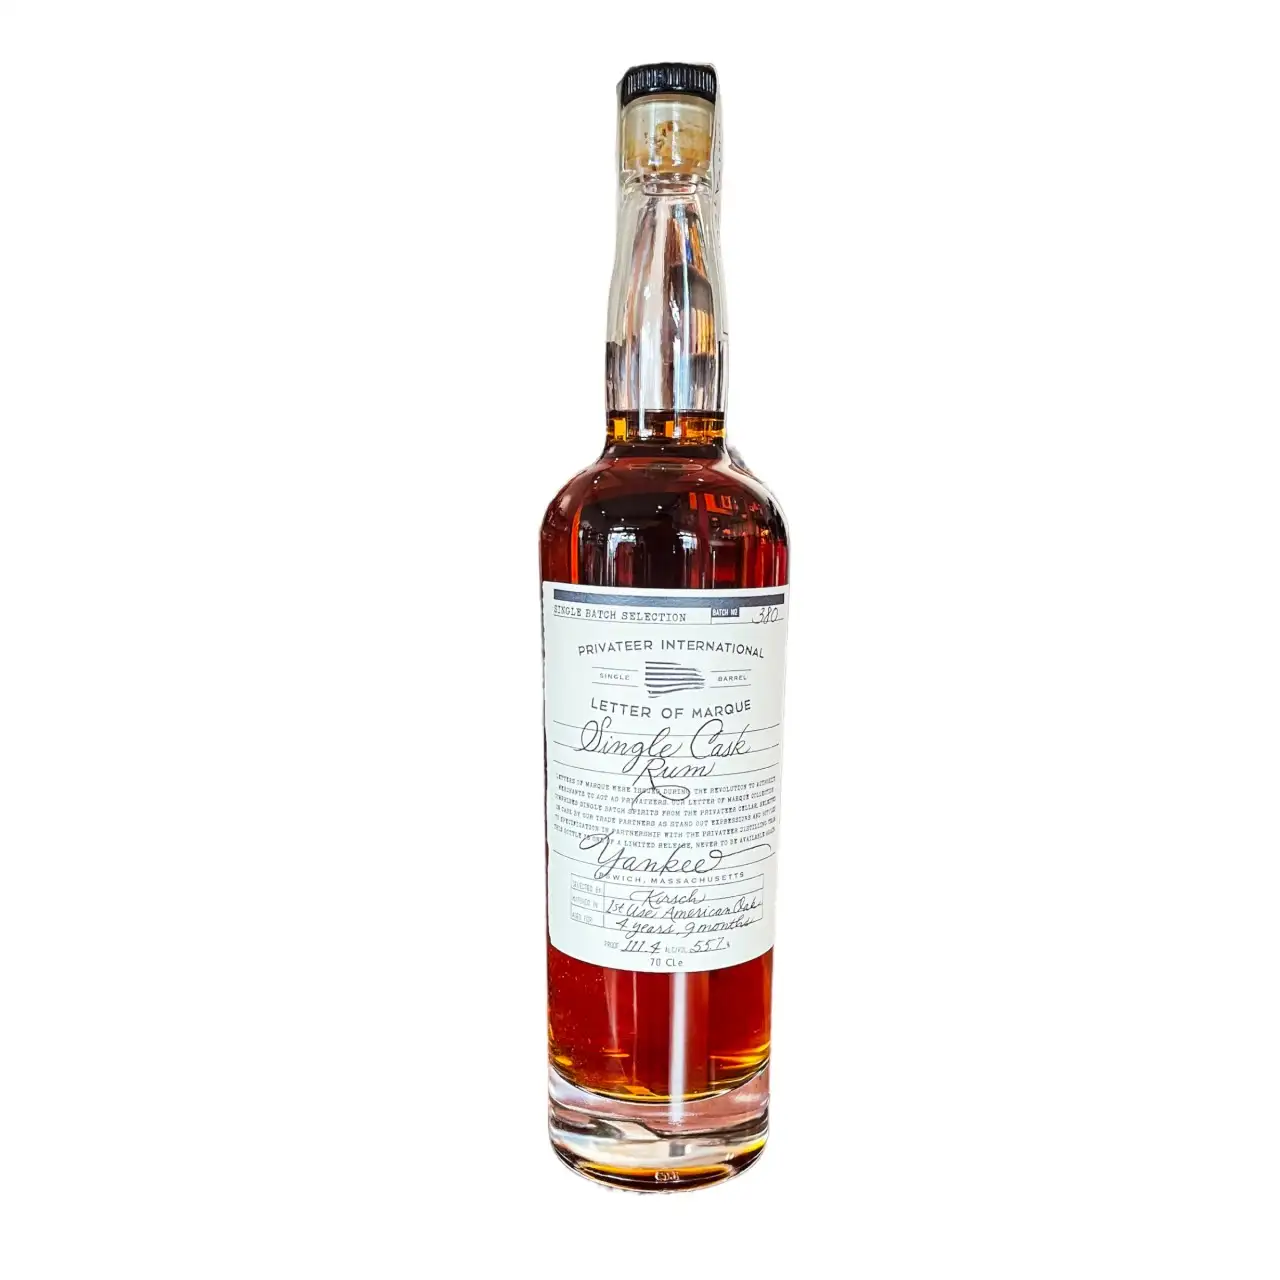 Image of the front of the bottle of the rum Letter of Marque 'Yankee' (Kirsch Whisky)